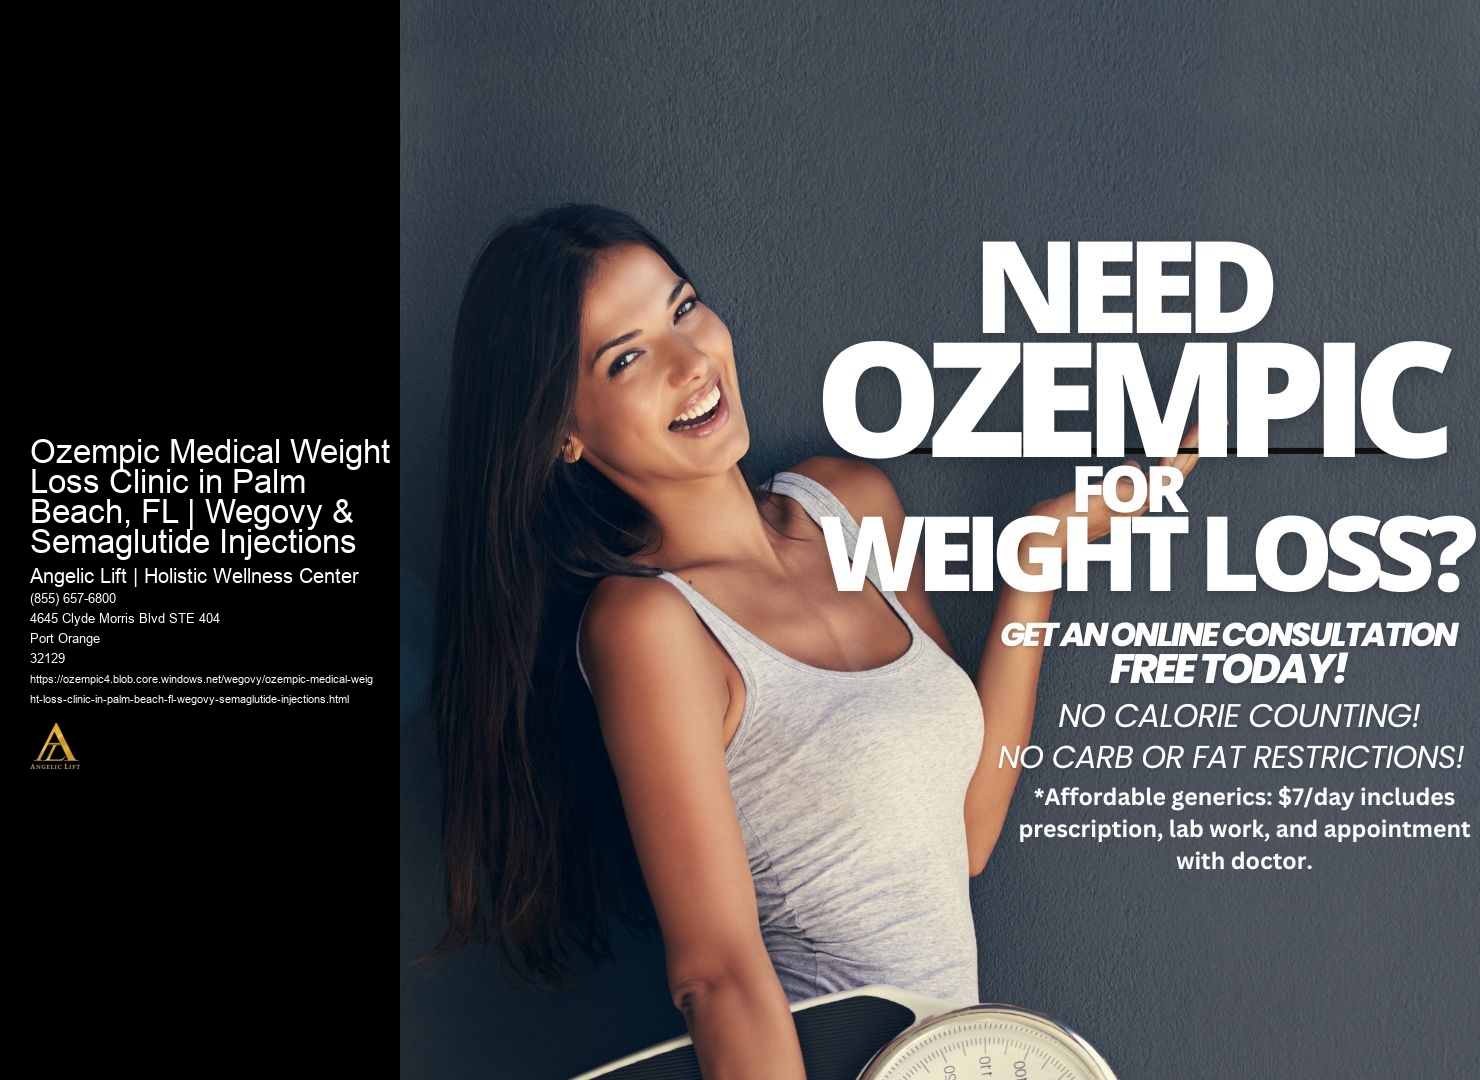 Ozempic Medical Weight Loss Clinic in Palm Beach, FL | Wegovy & Semaglutide Injections